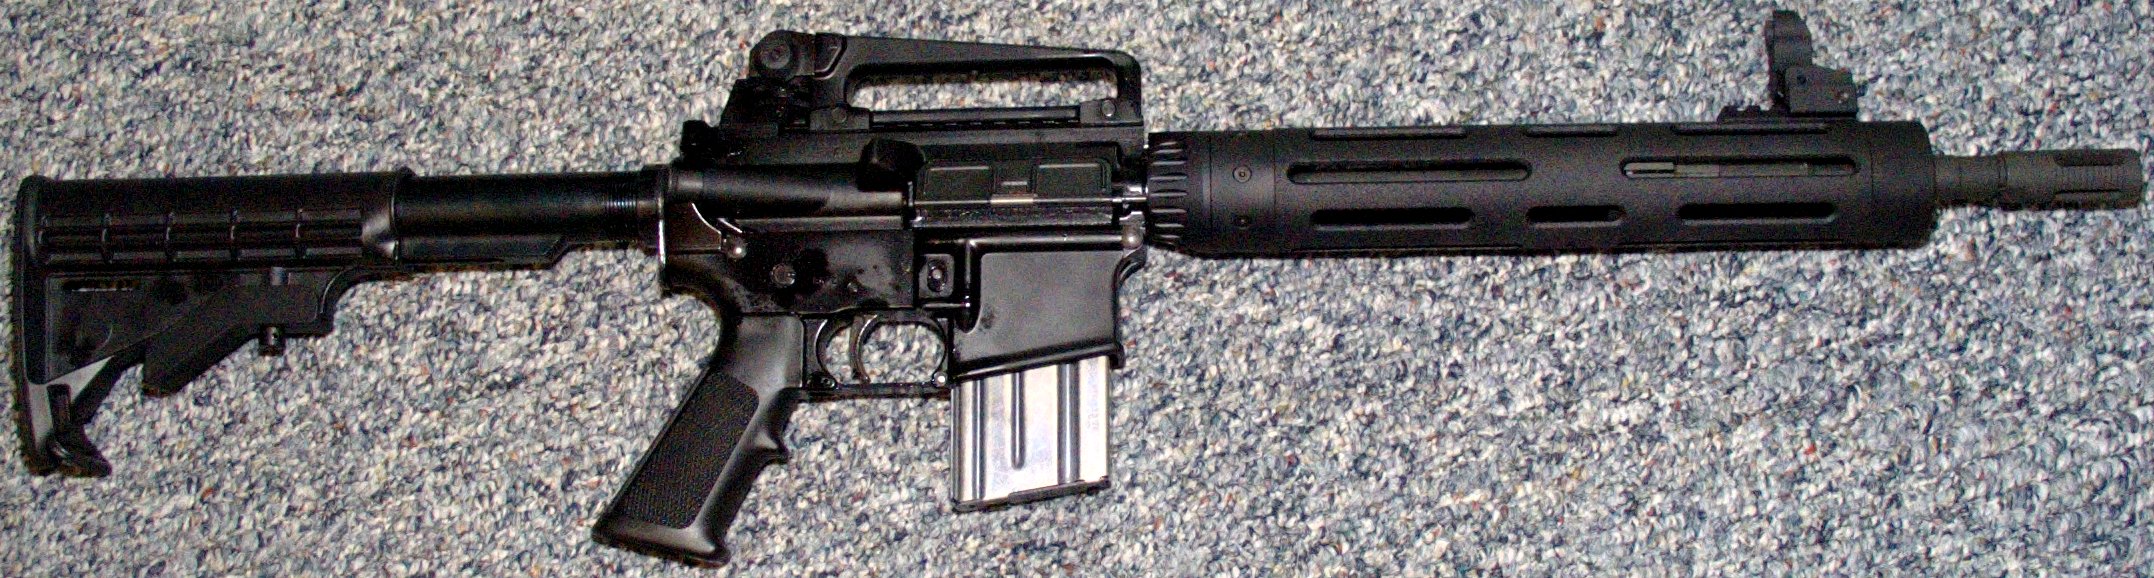 ar15-complete-large-04